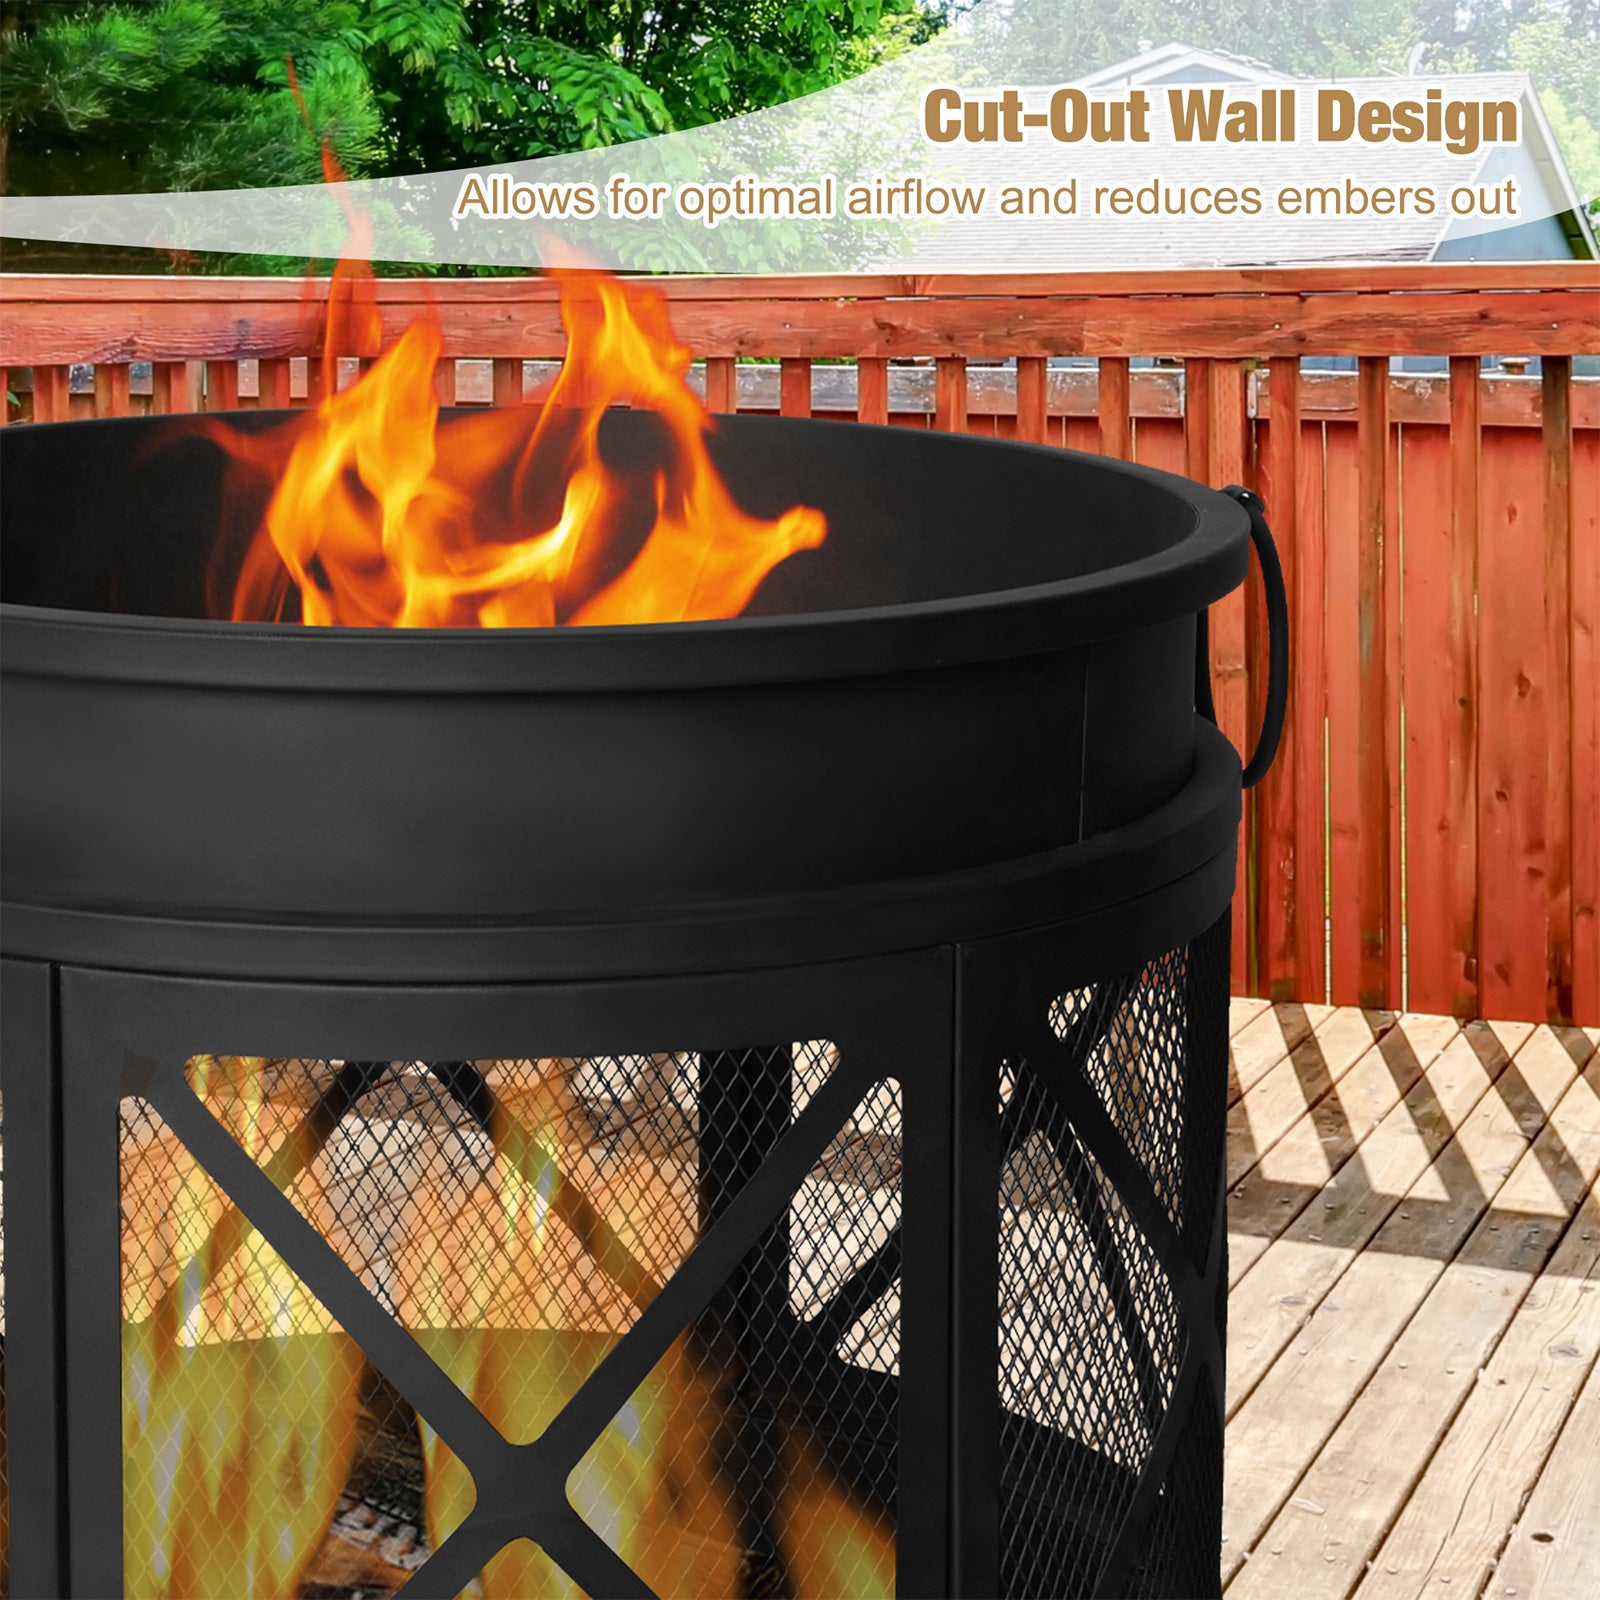 23.2" Barrel Outdoor Wood Burning Fire Pit Patio Fireplace with Spark Screen and Poker